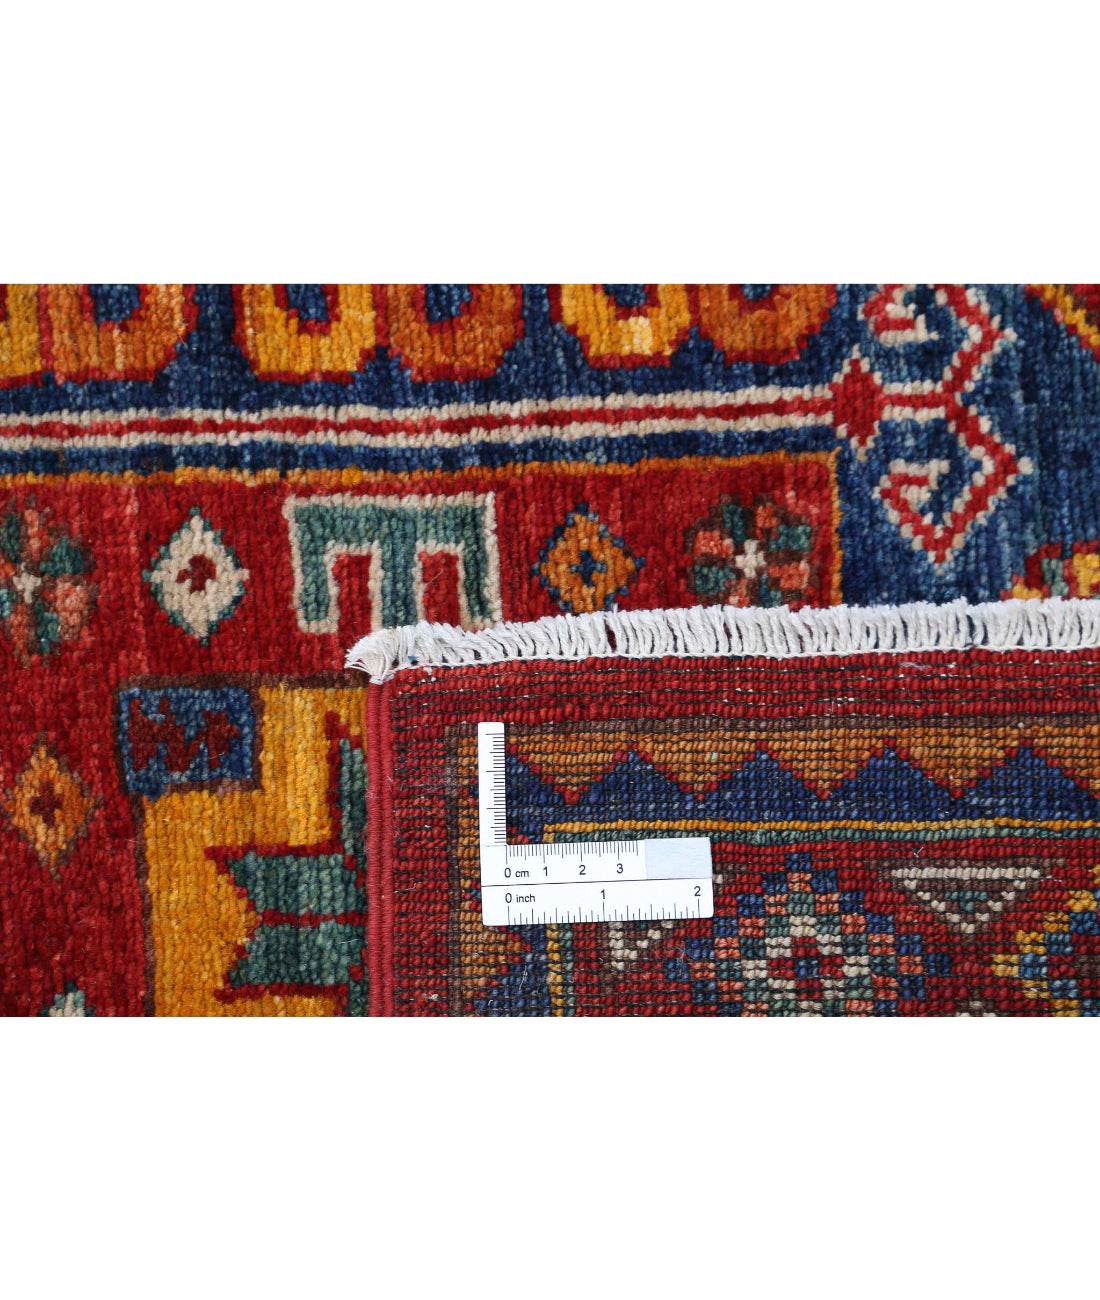 Hand Knotted Nomadic Caucasian Humna Wool Rug - 2'8'' x 7'10'' 2'8'' x 7'10'' (80 X 235) / Red / Gold